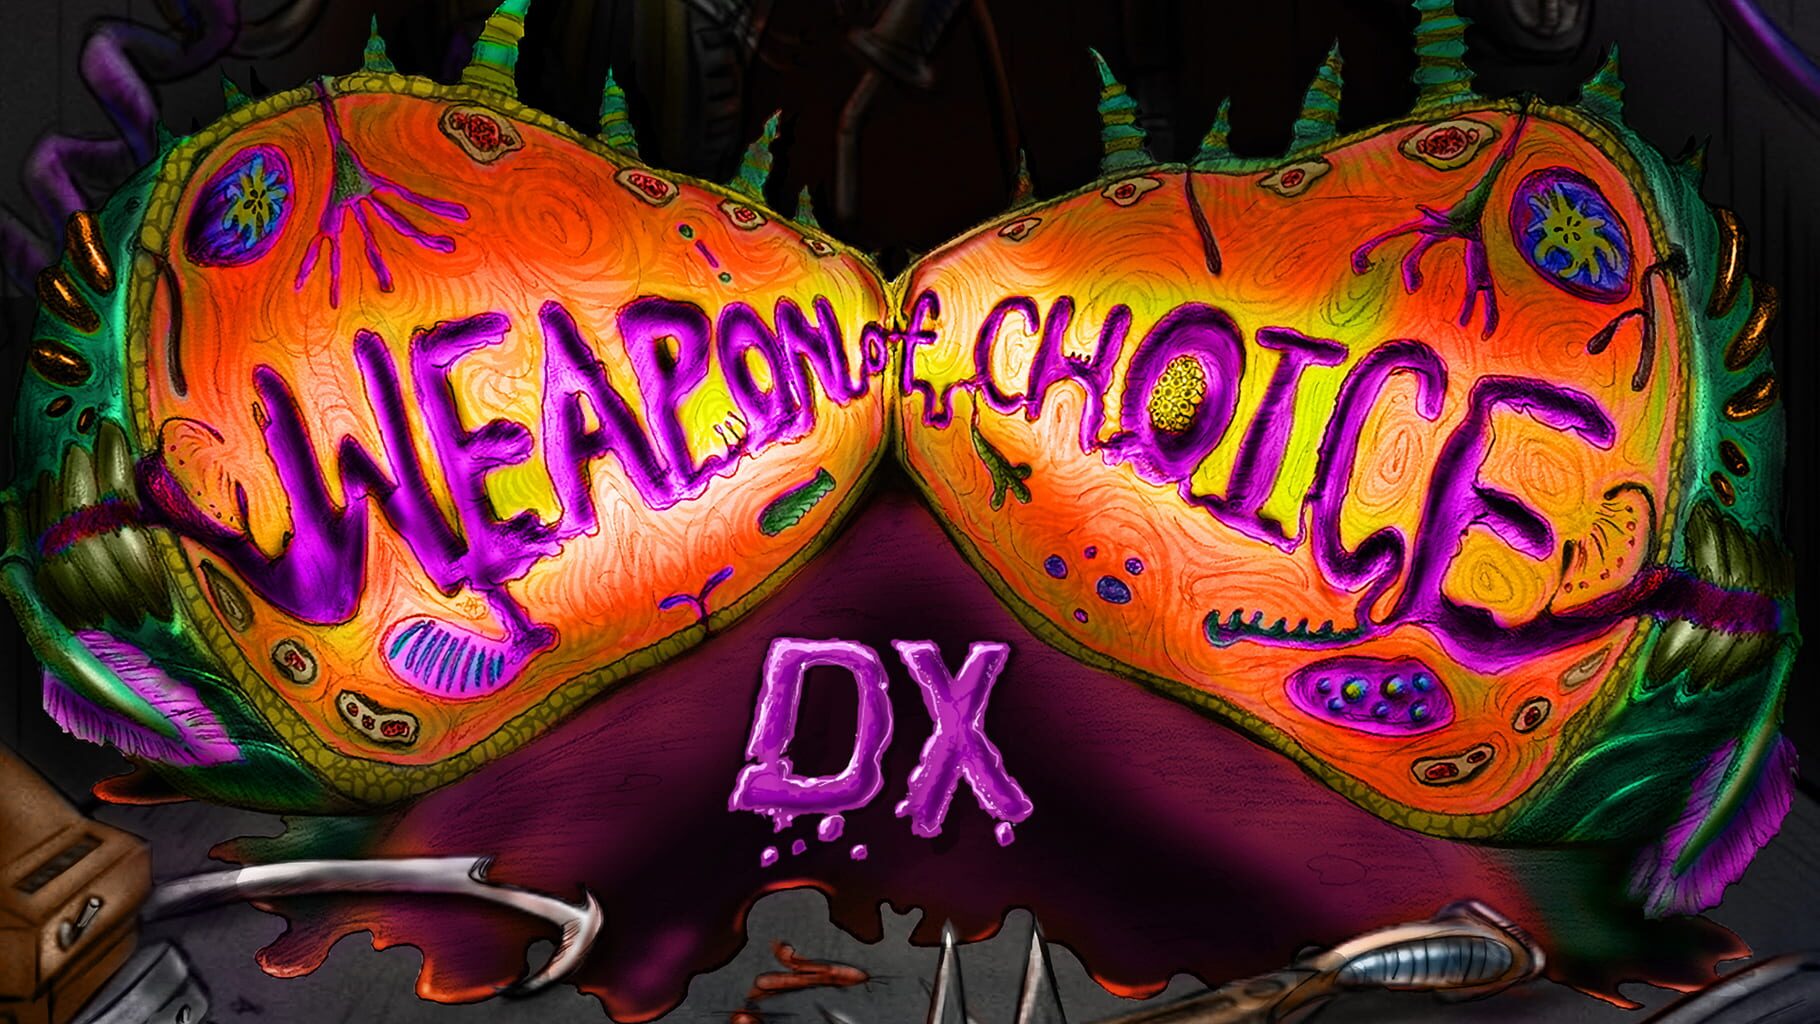 Weapon of Choice DX artwork